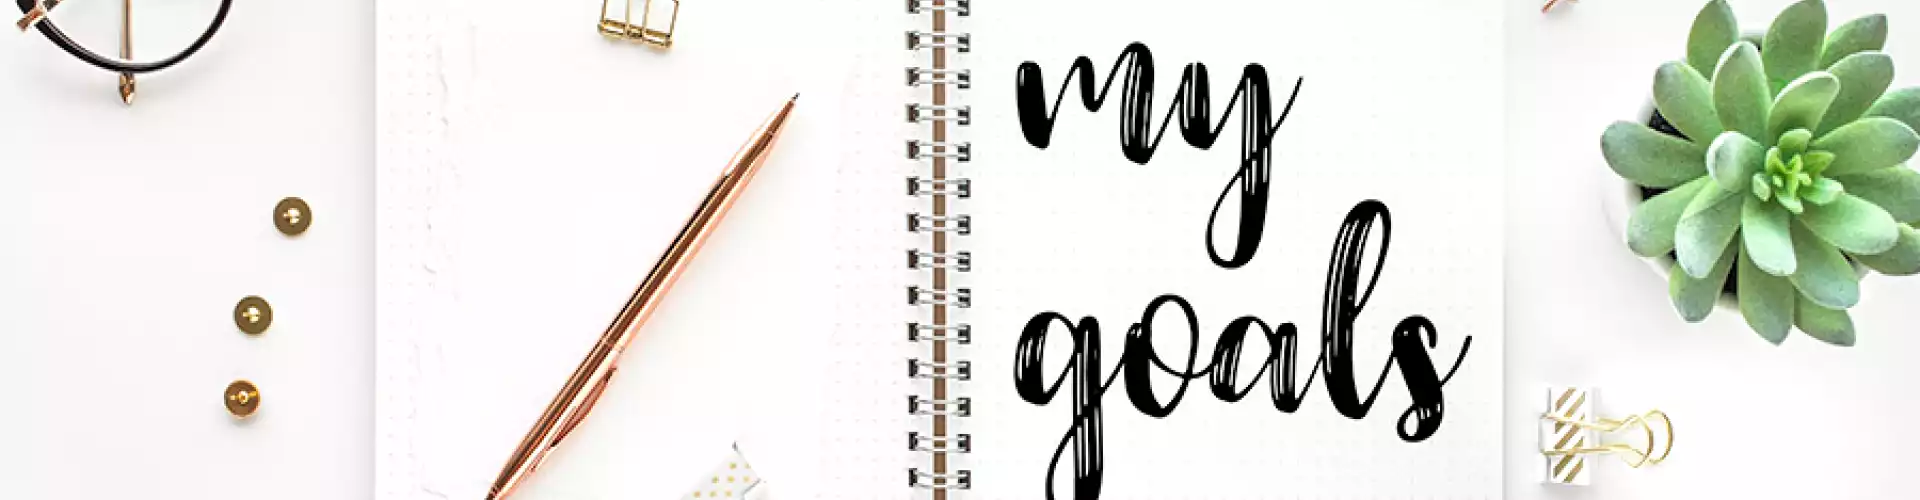 Organize Your Life with Bullet Journaling - Part 1